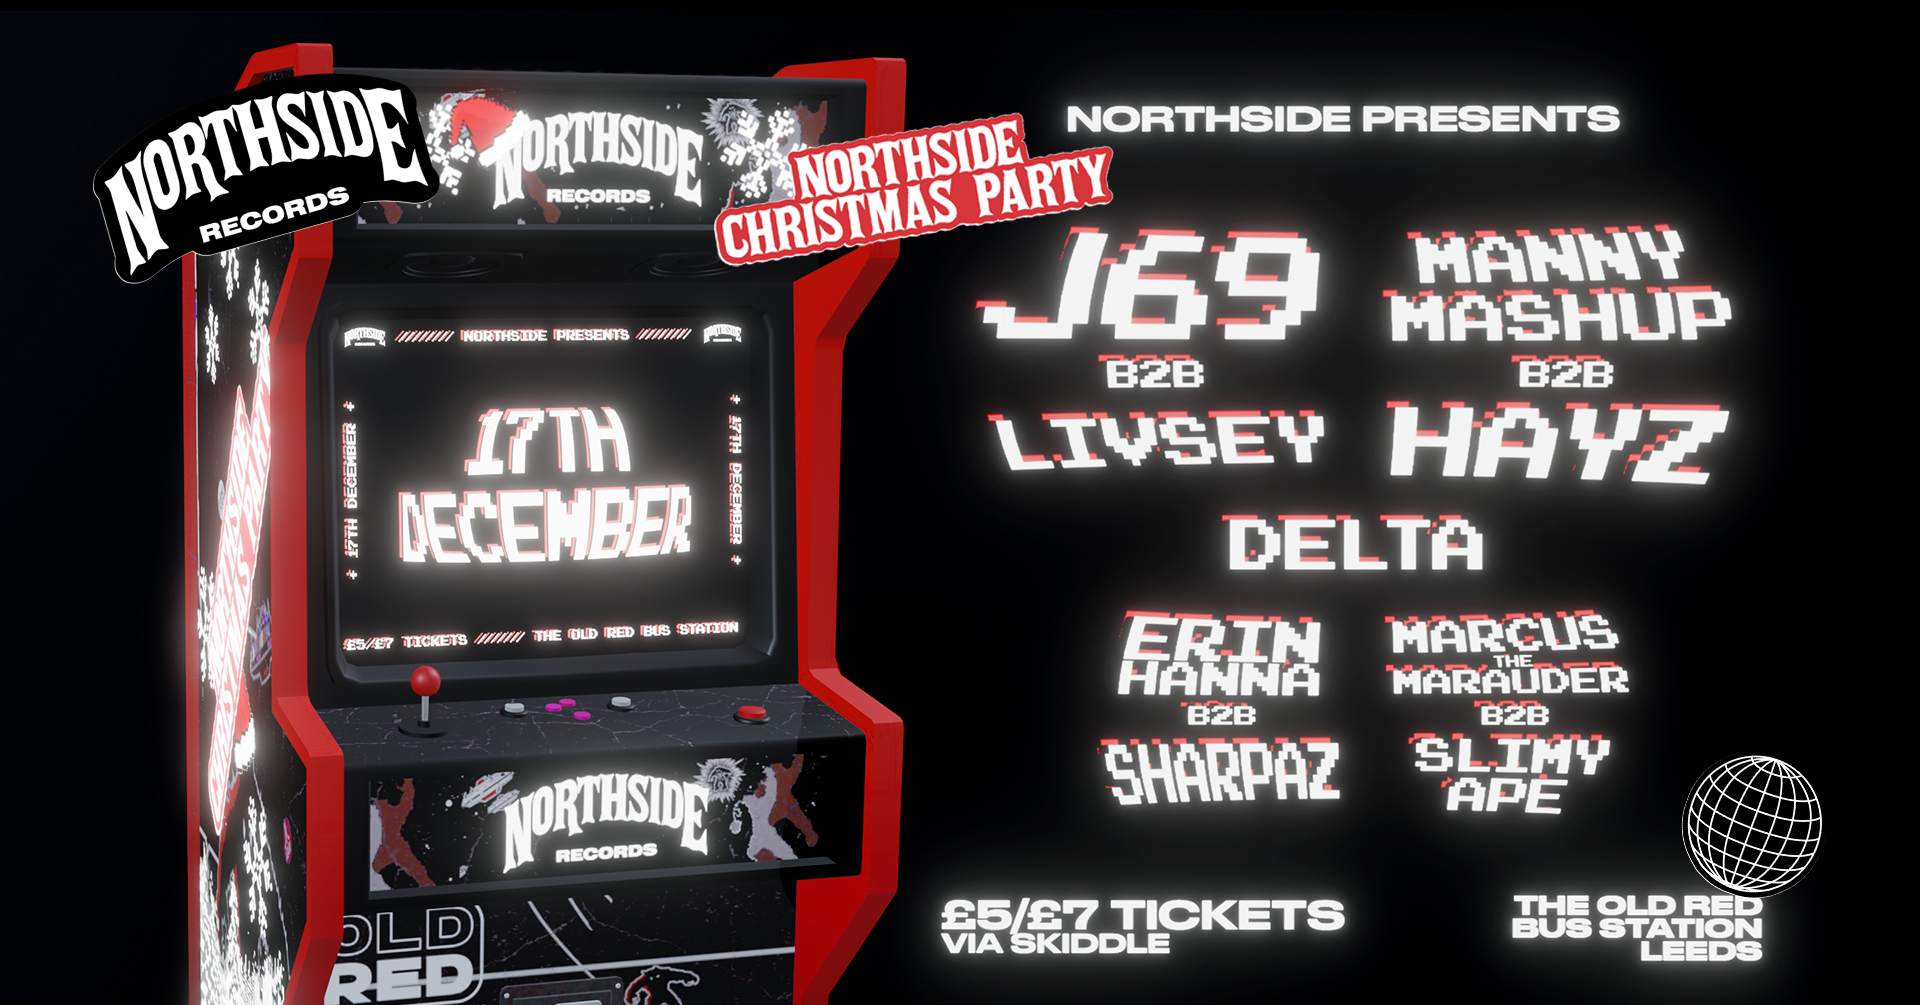 NORTHSIDE CHRISTMAS PARTY:MANNY MASHUP, J69, LIVSEY, HAYZ AND MORE - フライヤー表